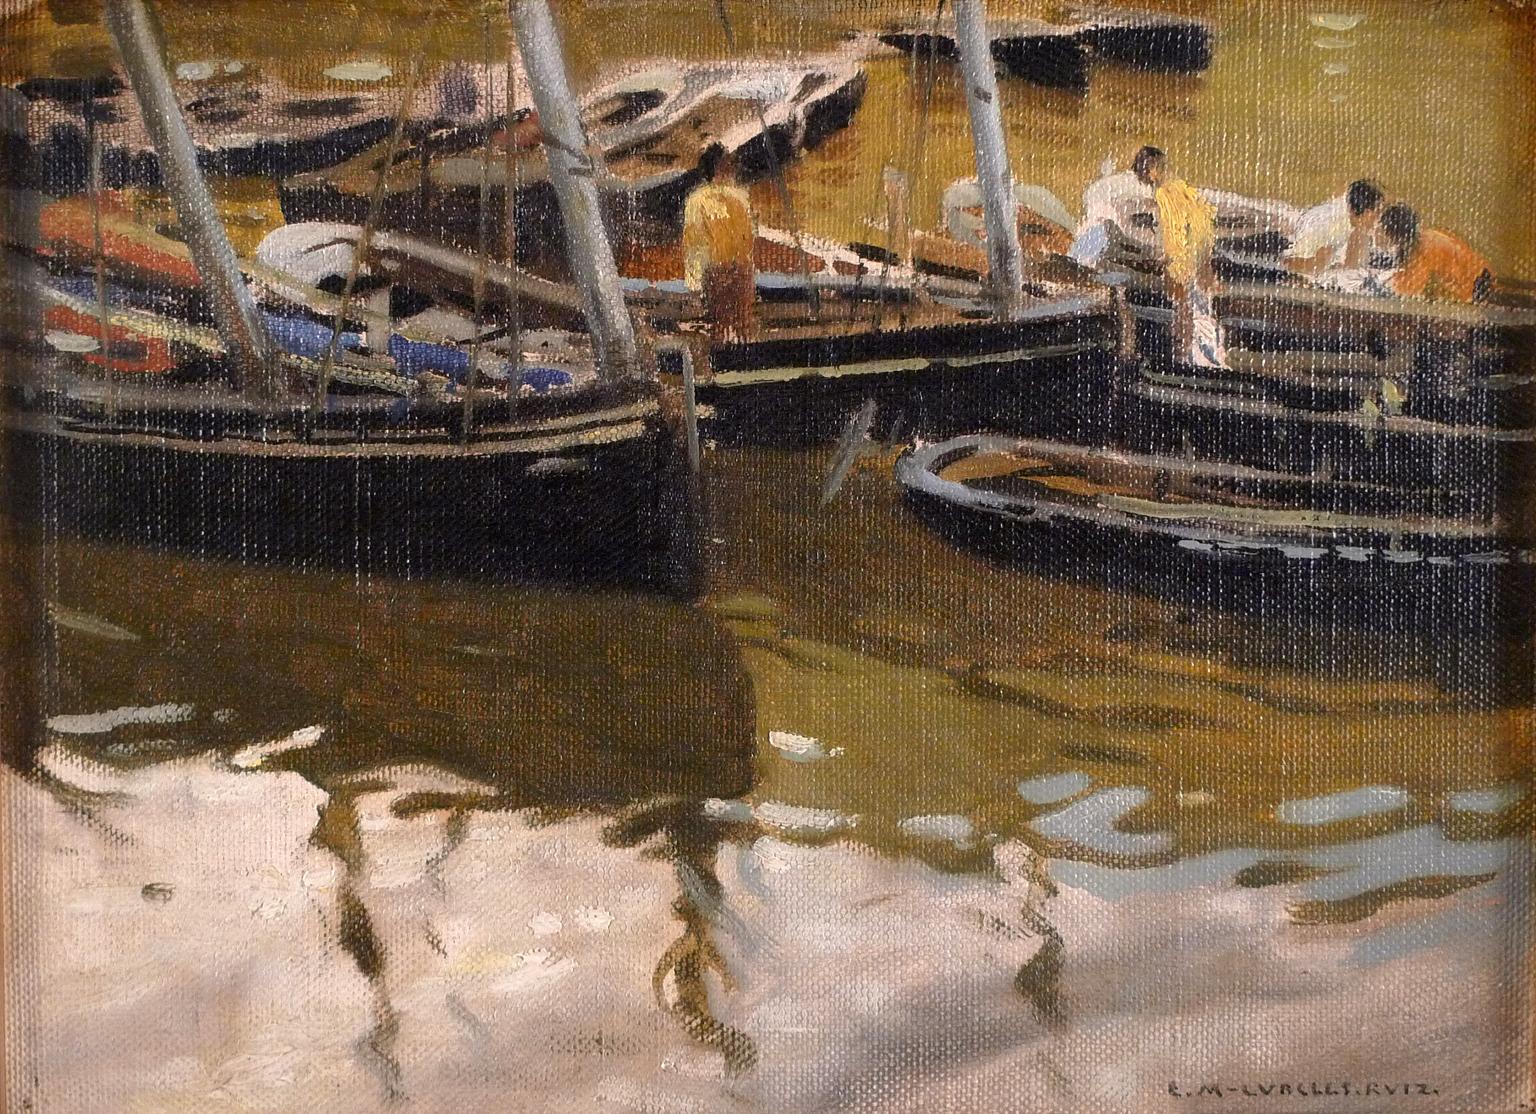 "Preparing for fishing", 19th Century oil on canvas by E. Martínez Cubells 